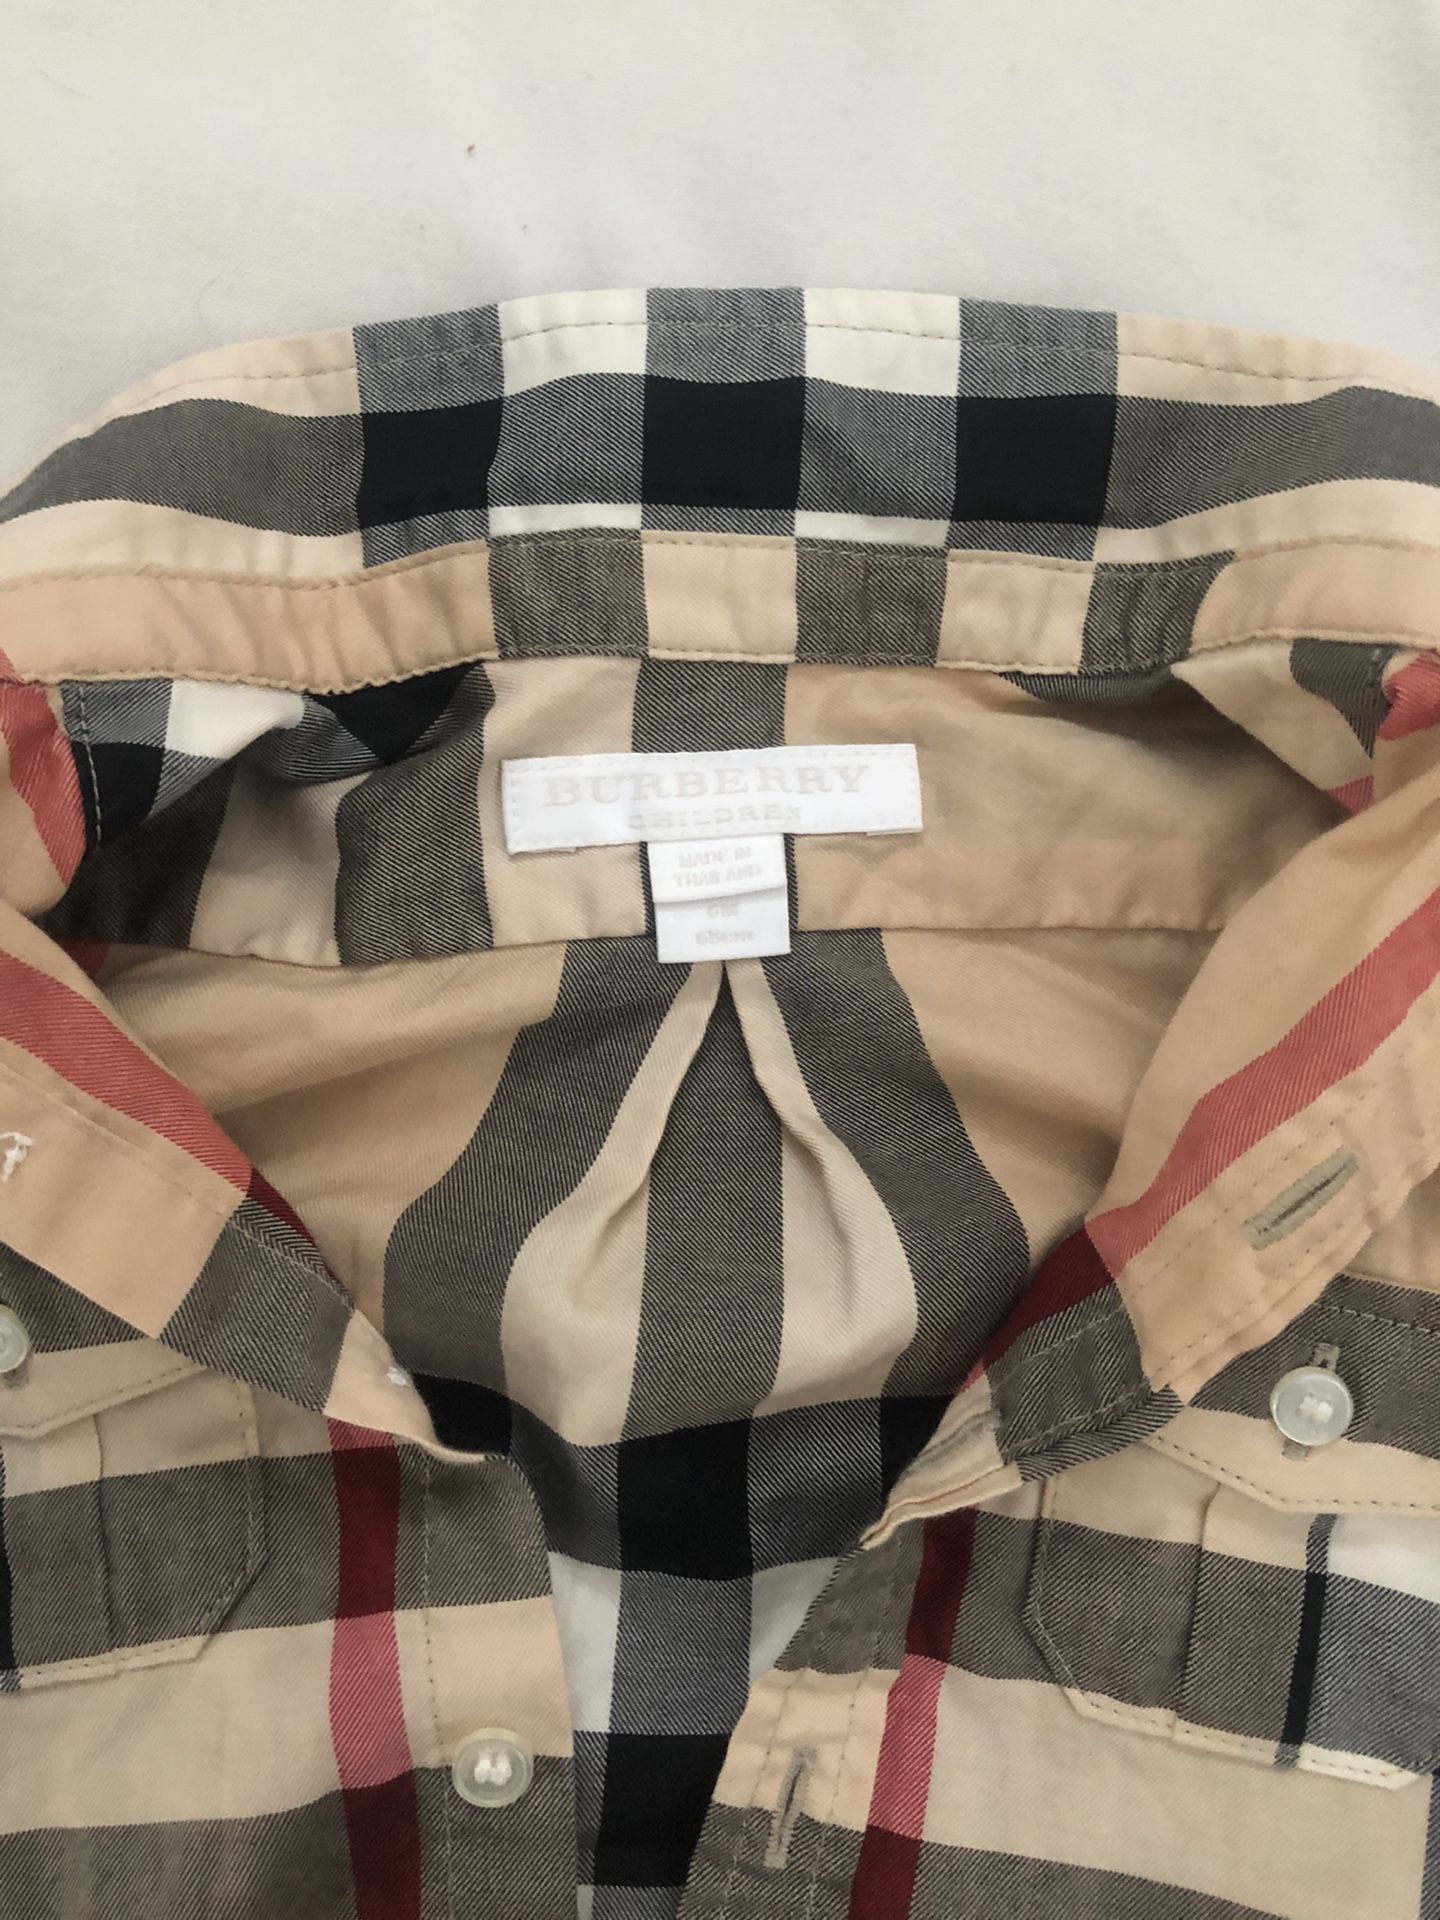 Burberry Baby Boy Clothes - Pants and Shirt - 6 mos